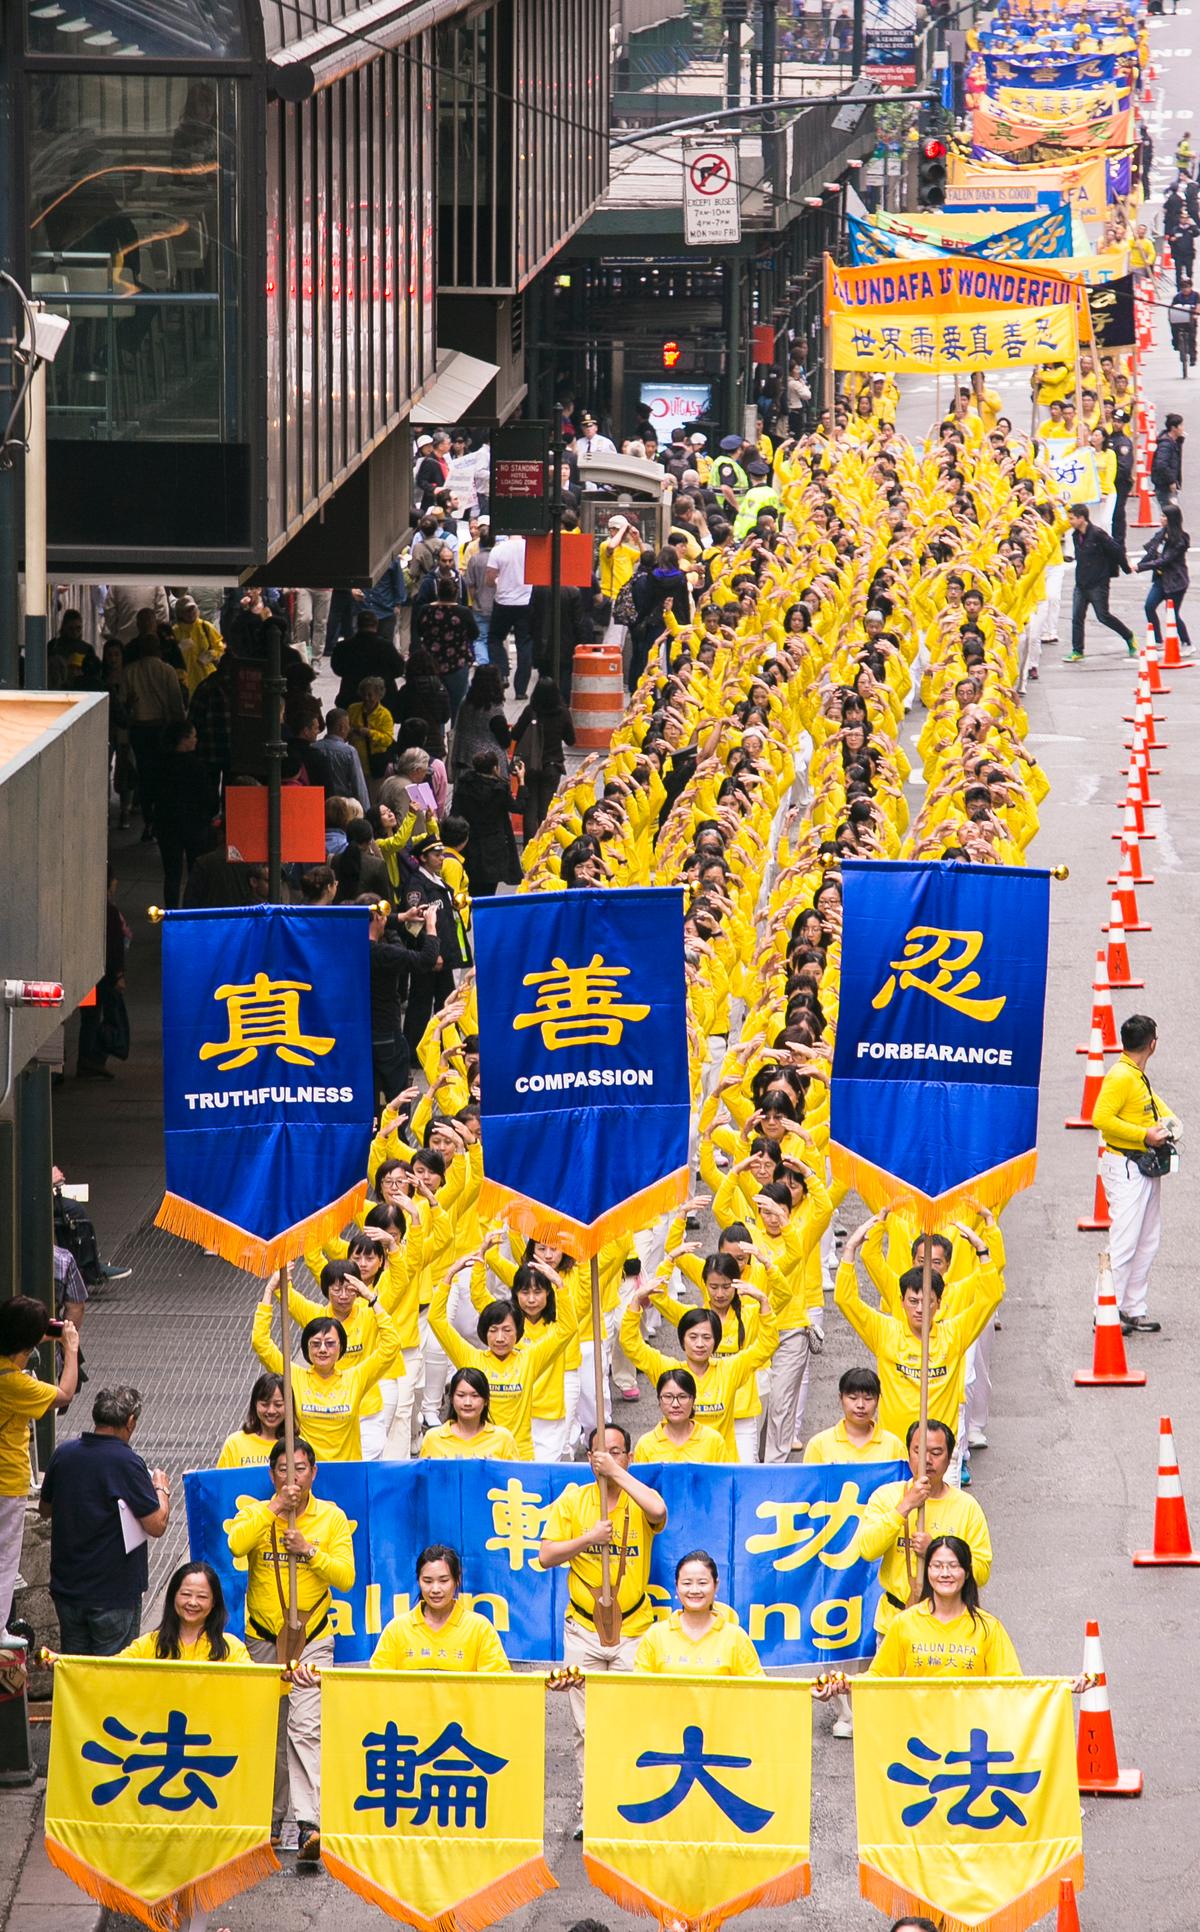 Around 10,000 Falun Gong practitioners march in the World Falun Dafa parade in New York on May 13, 2016. (Samira Bouaou/Epoch Times)